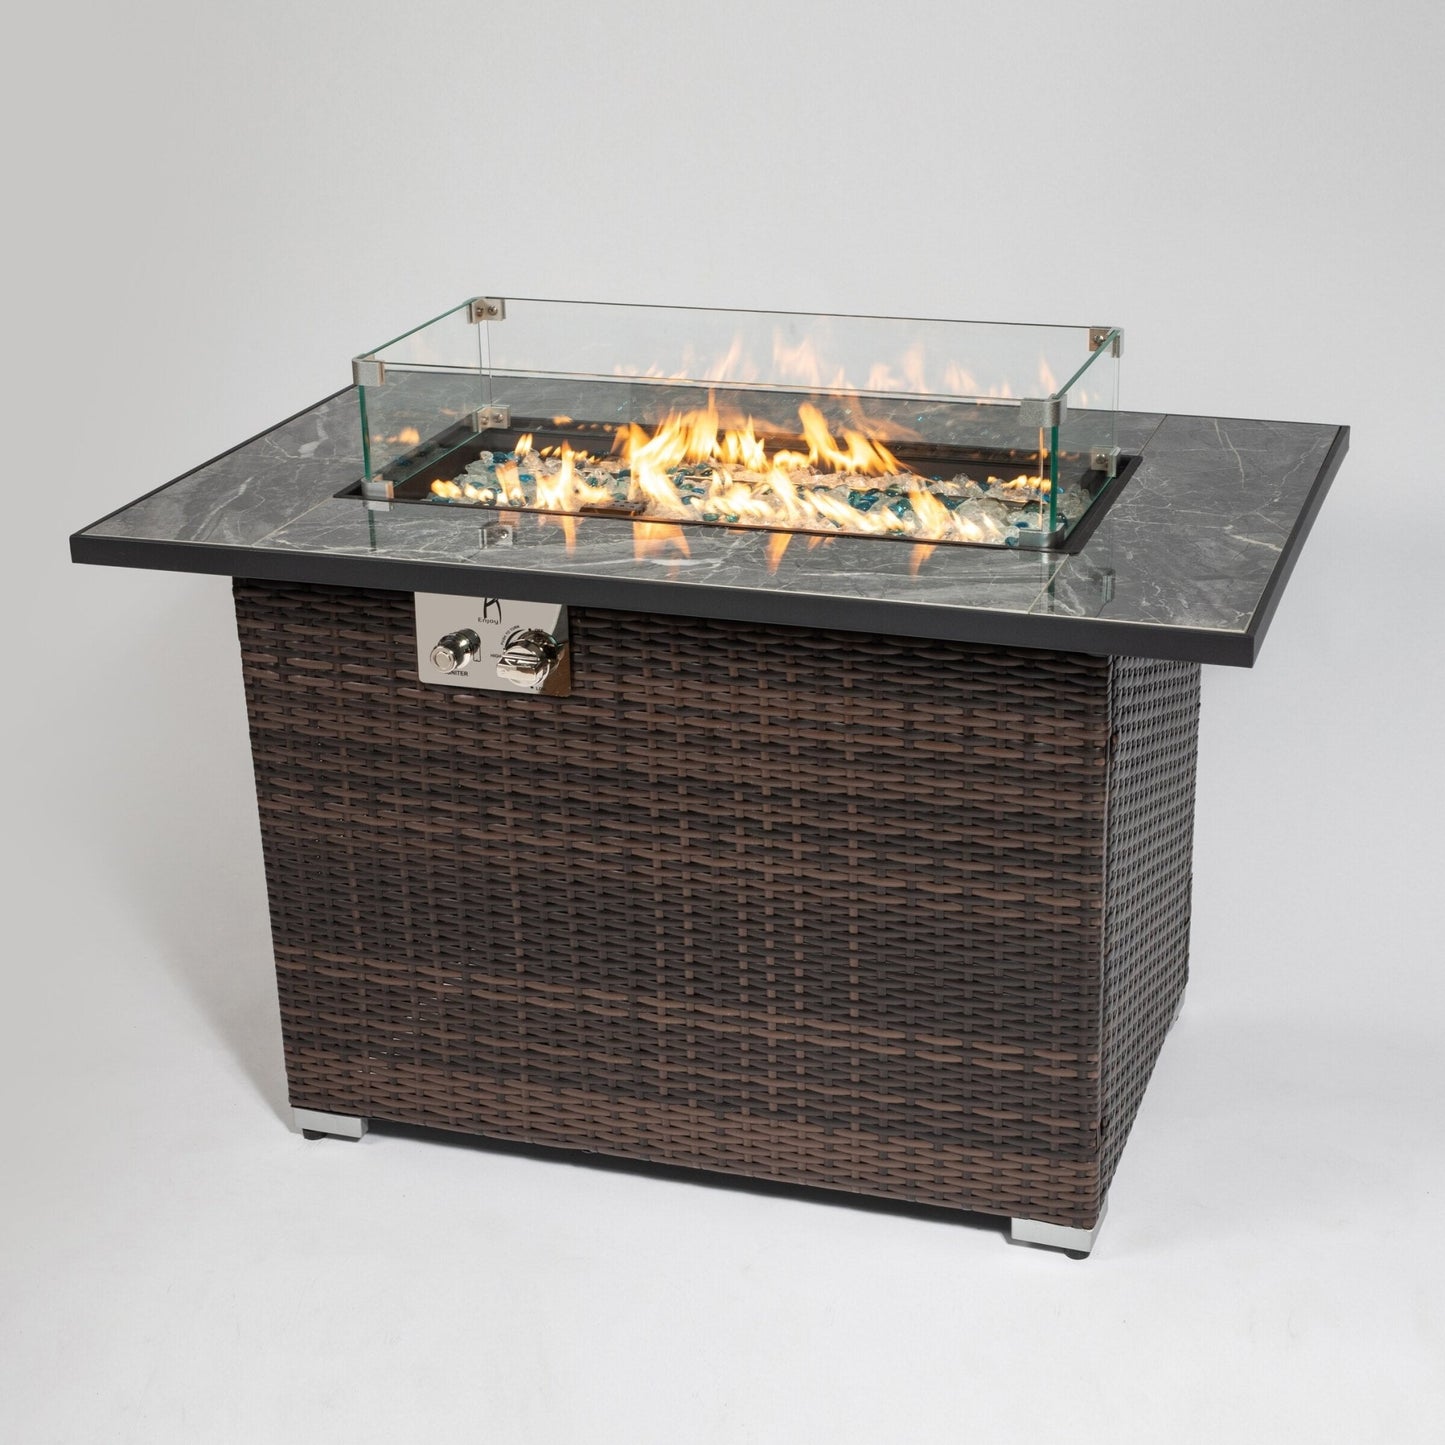 0-44inch Outdoor Fire Pit Table with Ceramic Tabletop Gas Fire Table - Outdoor Style Company